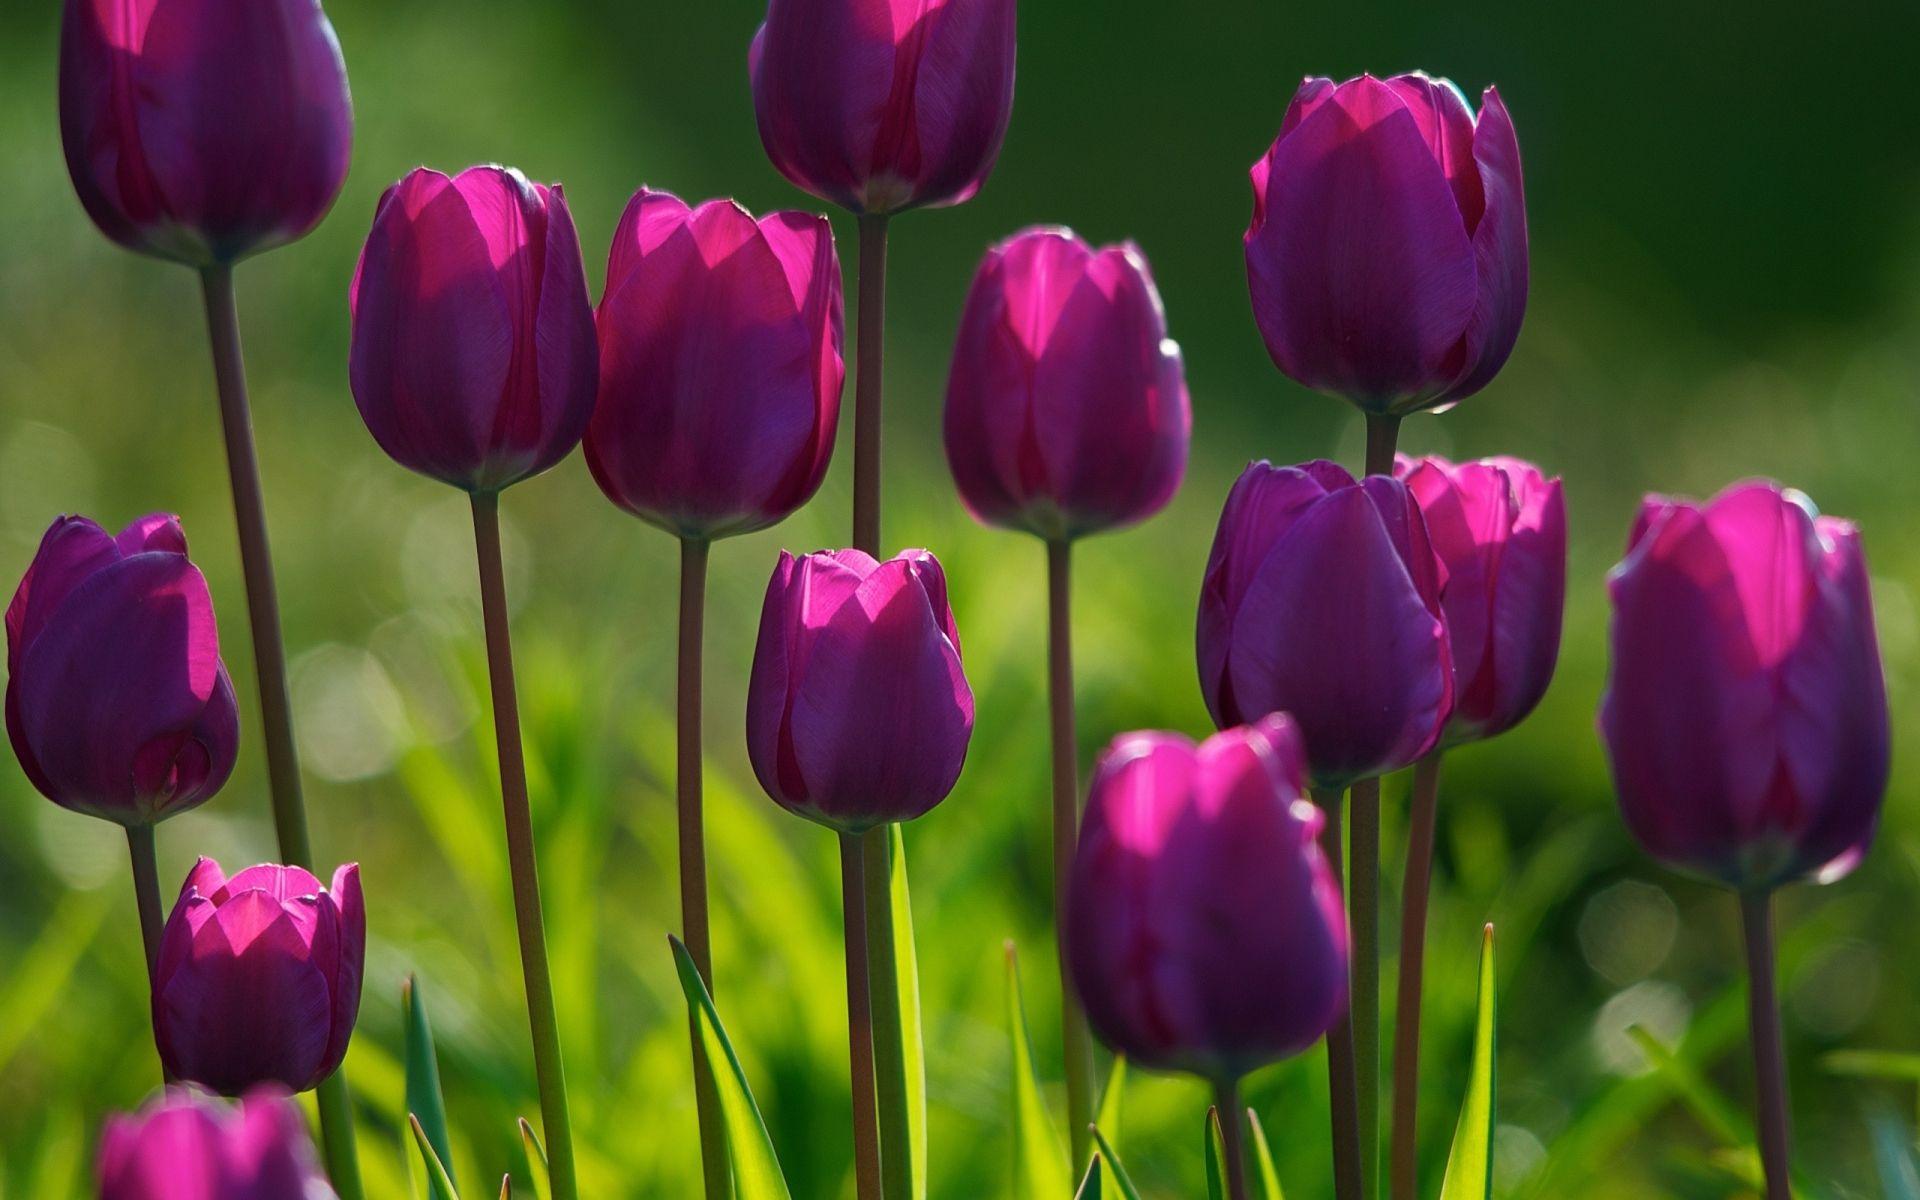 flowers picture. Spring Purple Tulips Flowers Wallpaper. Spring flowers wallpaper, Purple tulips, Purple flowers wallpaper